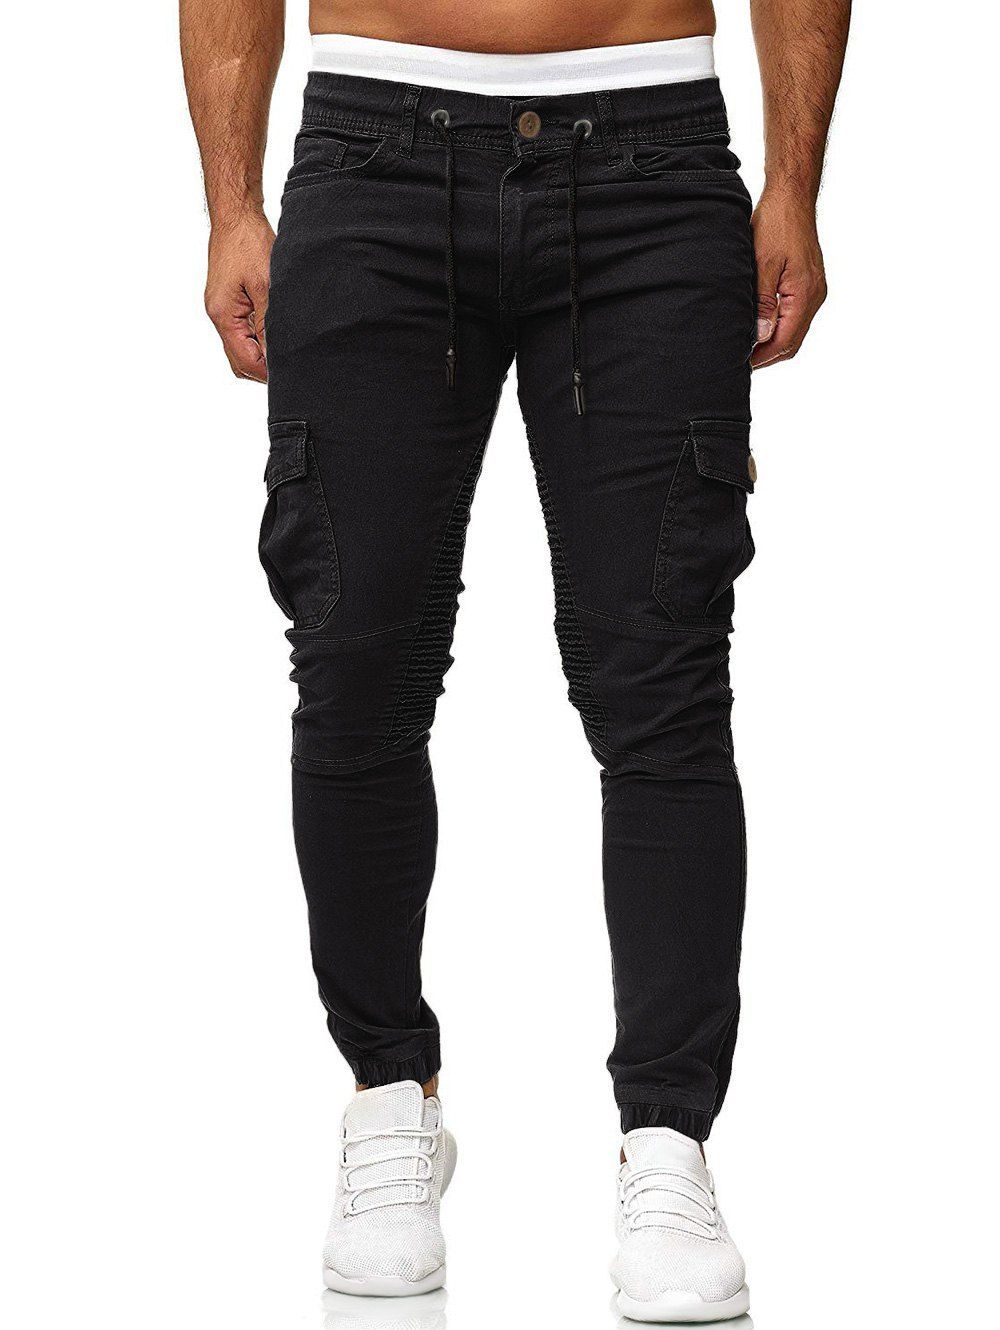 [42% OFF] 2021 Pleated Trim Drawstring Cargo Jogger Pants In BLACK ...